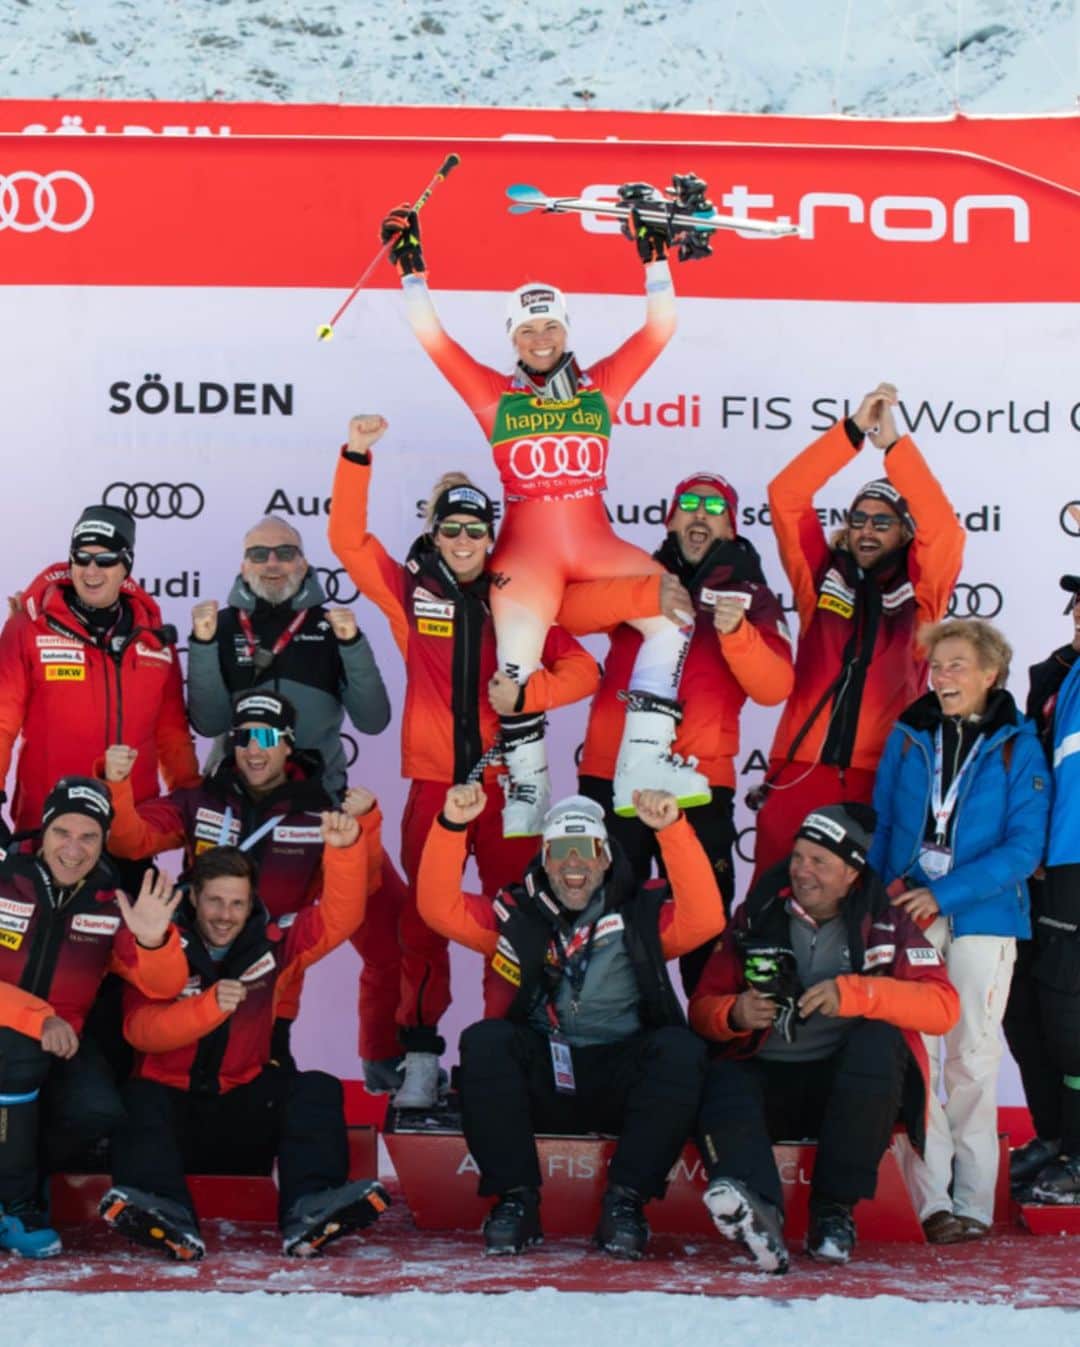 Descenteのインスタグラム：「Lara Gut-Behrami, from the Swiss Ski Team, launched the 2023/24 World Cup season with her 38th World Cup victory! The 2023/2024 FIS Alpine Ski World Cup kicked off in Sölden, Austria over the weekend. DESCENTE is looking forward to supporting the team this season as they take on new challenges in their new Sunrise ski suits.  #descente #designthatmoves  #descenteski #swissskiteam #alpineskiing #fisalpine #ski #skiing #skiwear #skigear #wintersports」